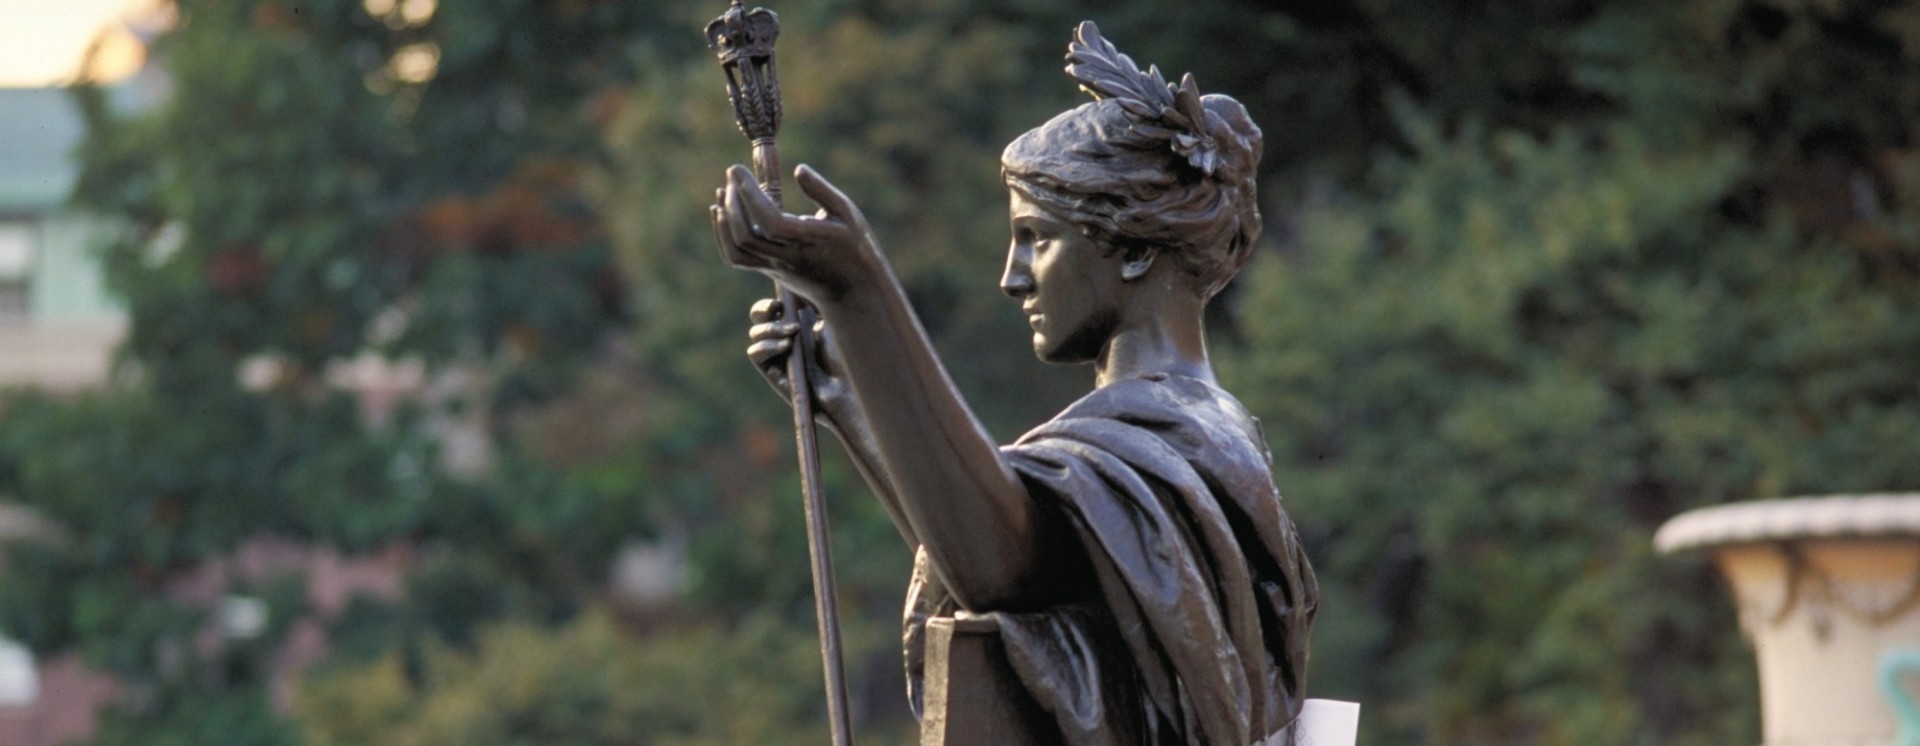 Columbia University Alma Mater side image of a statue of a woman